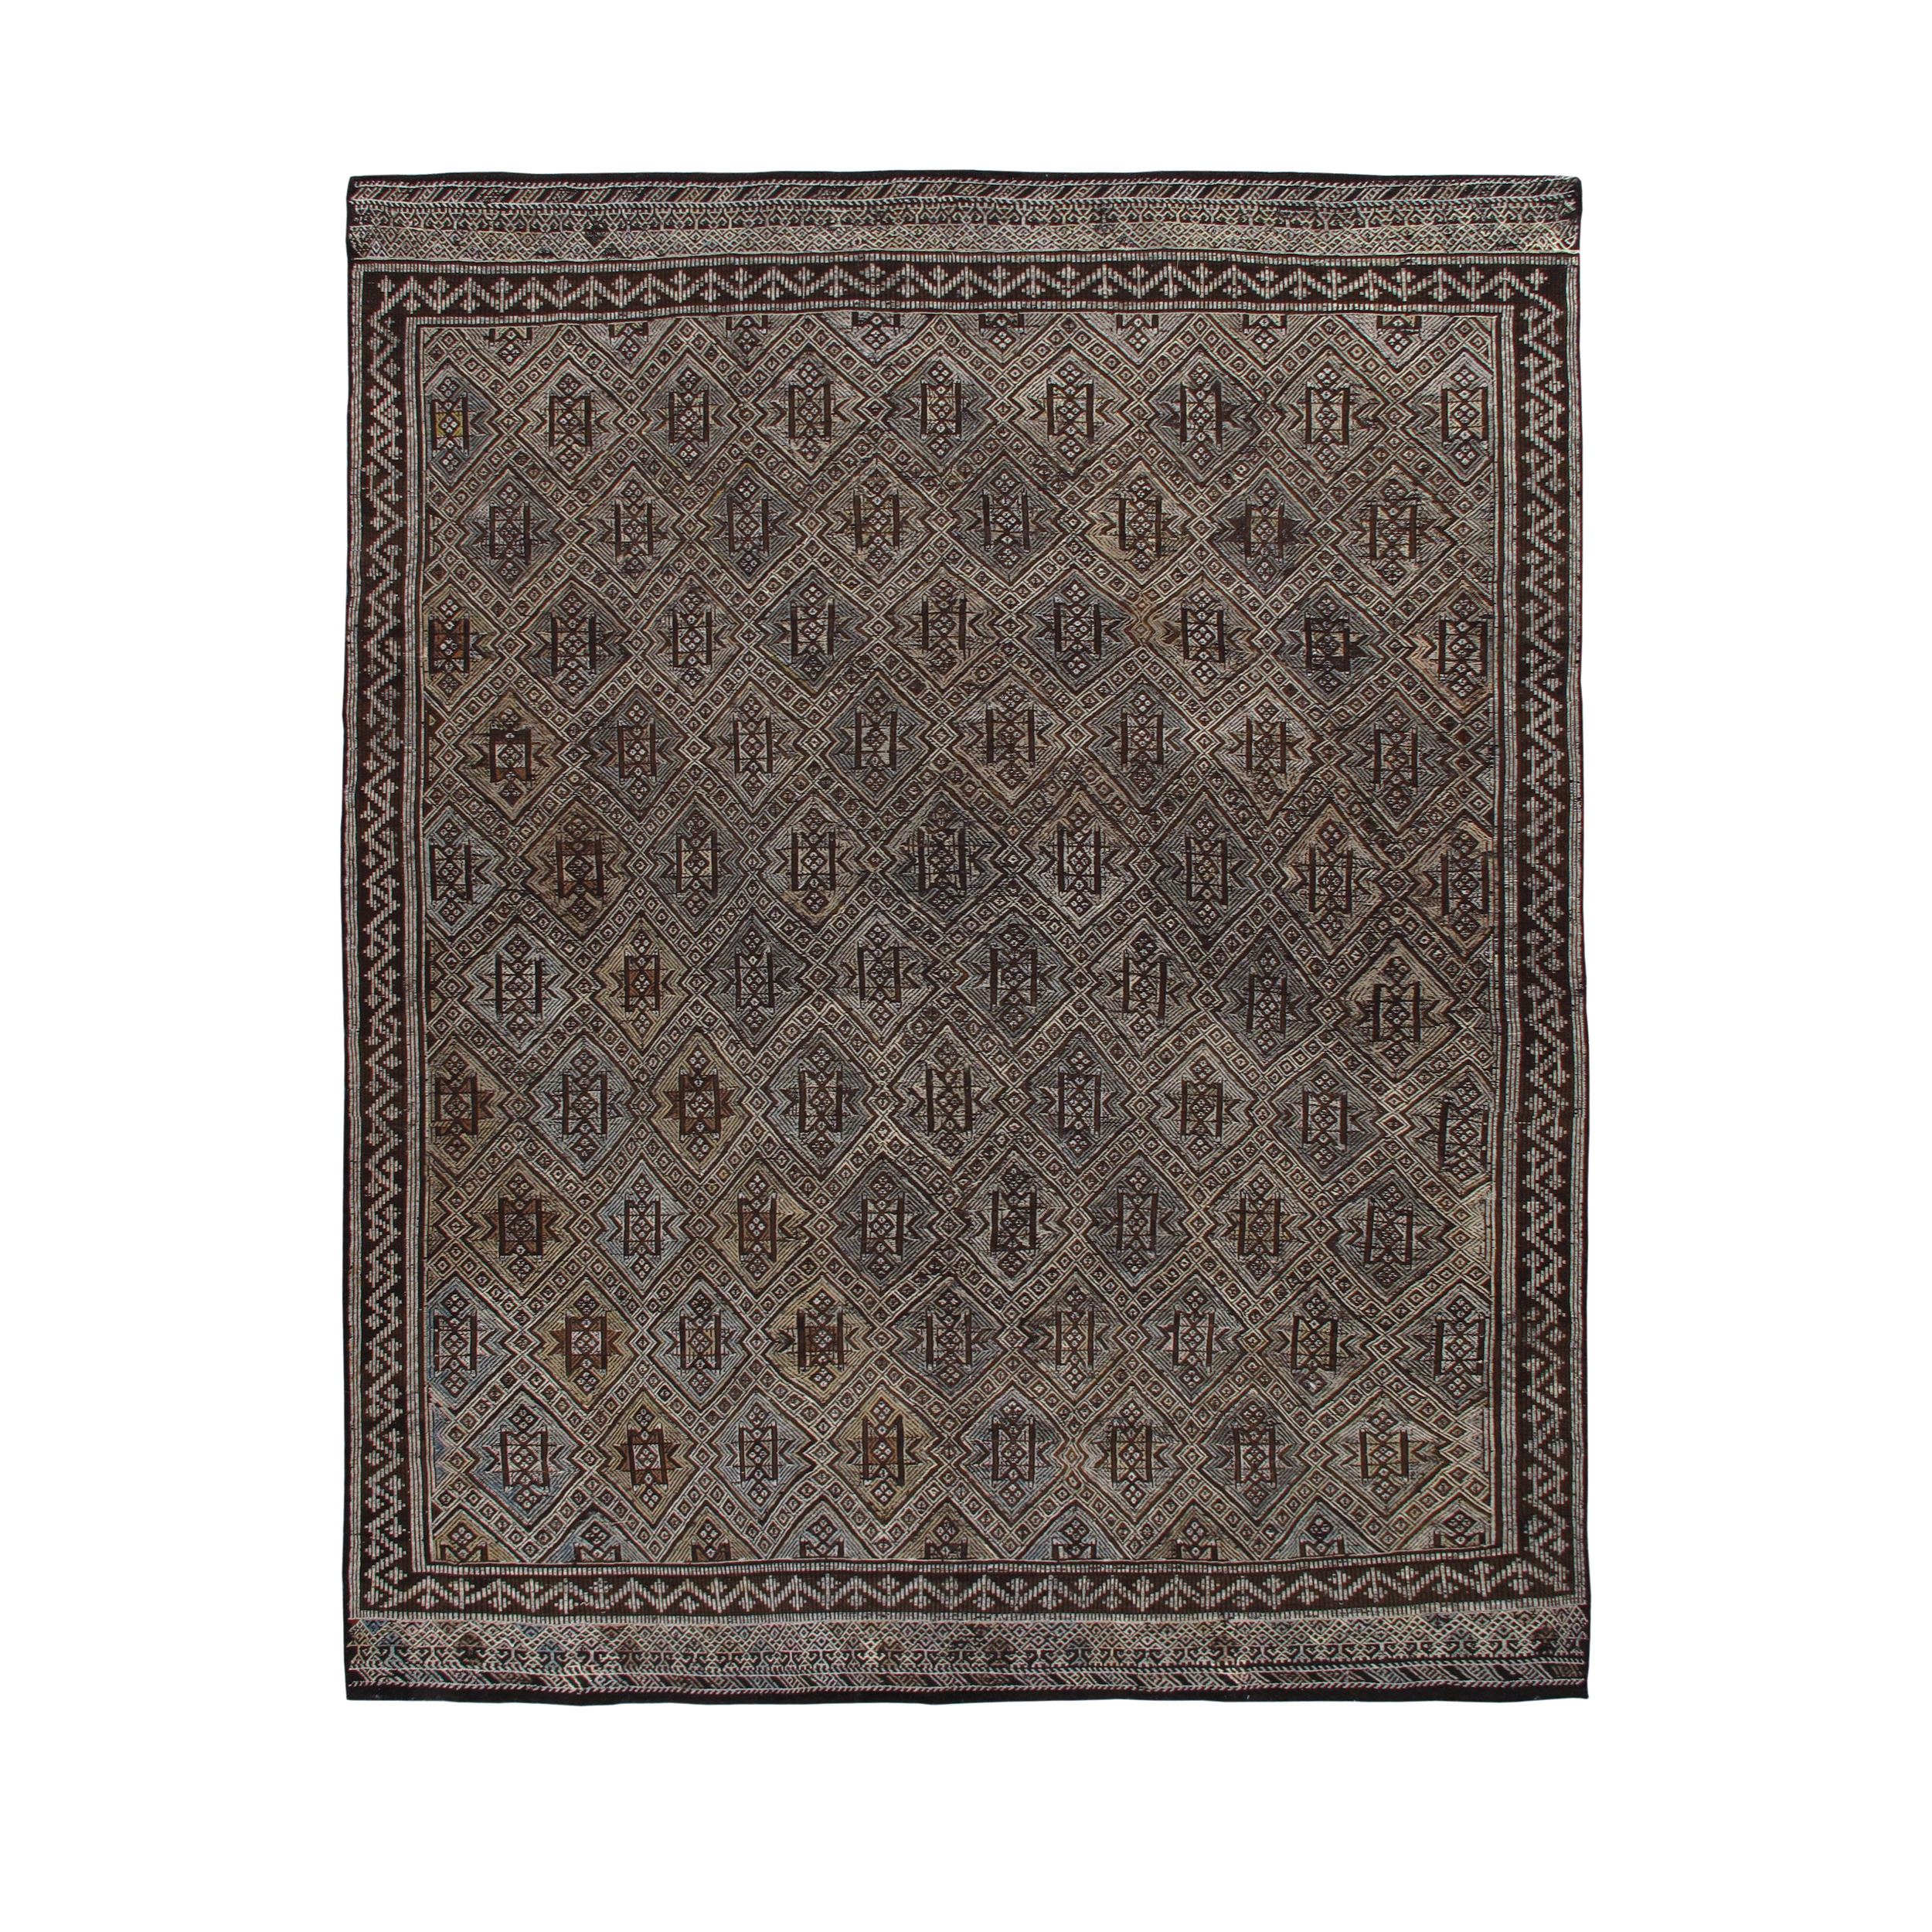 This Vintage Zeillu Flatweave rug is hand-woven and made of 100% wool. 